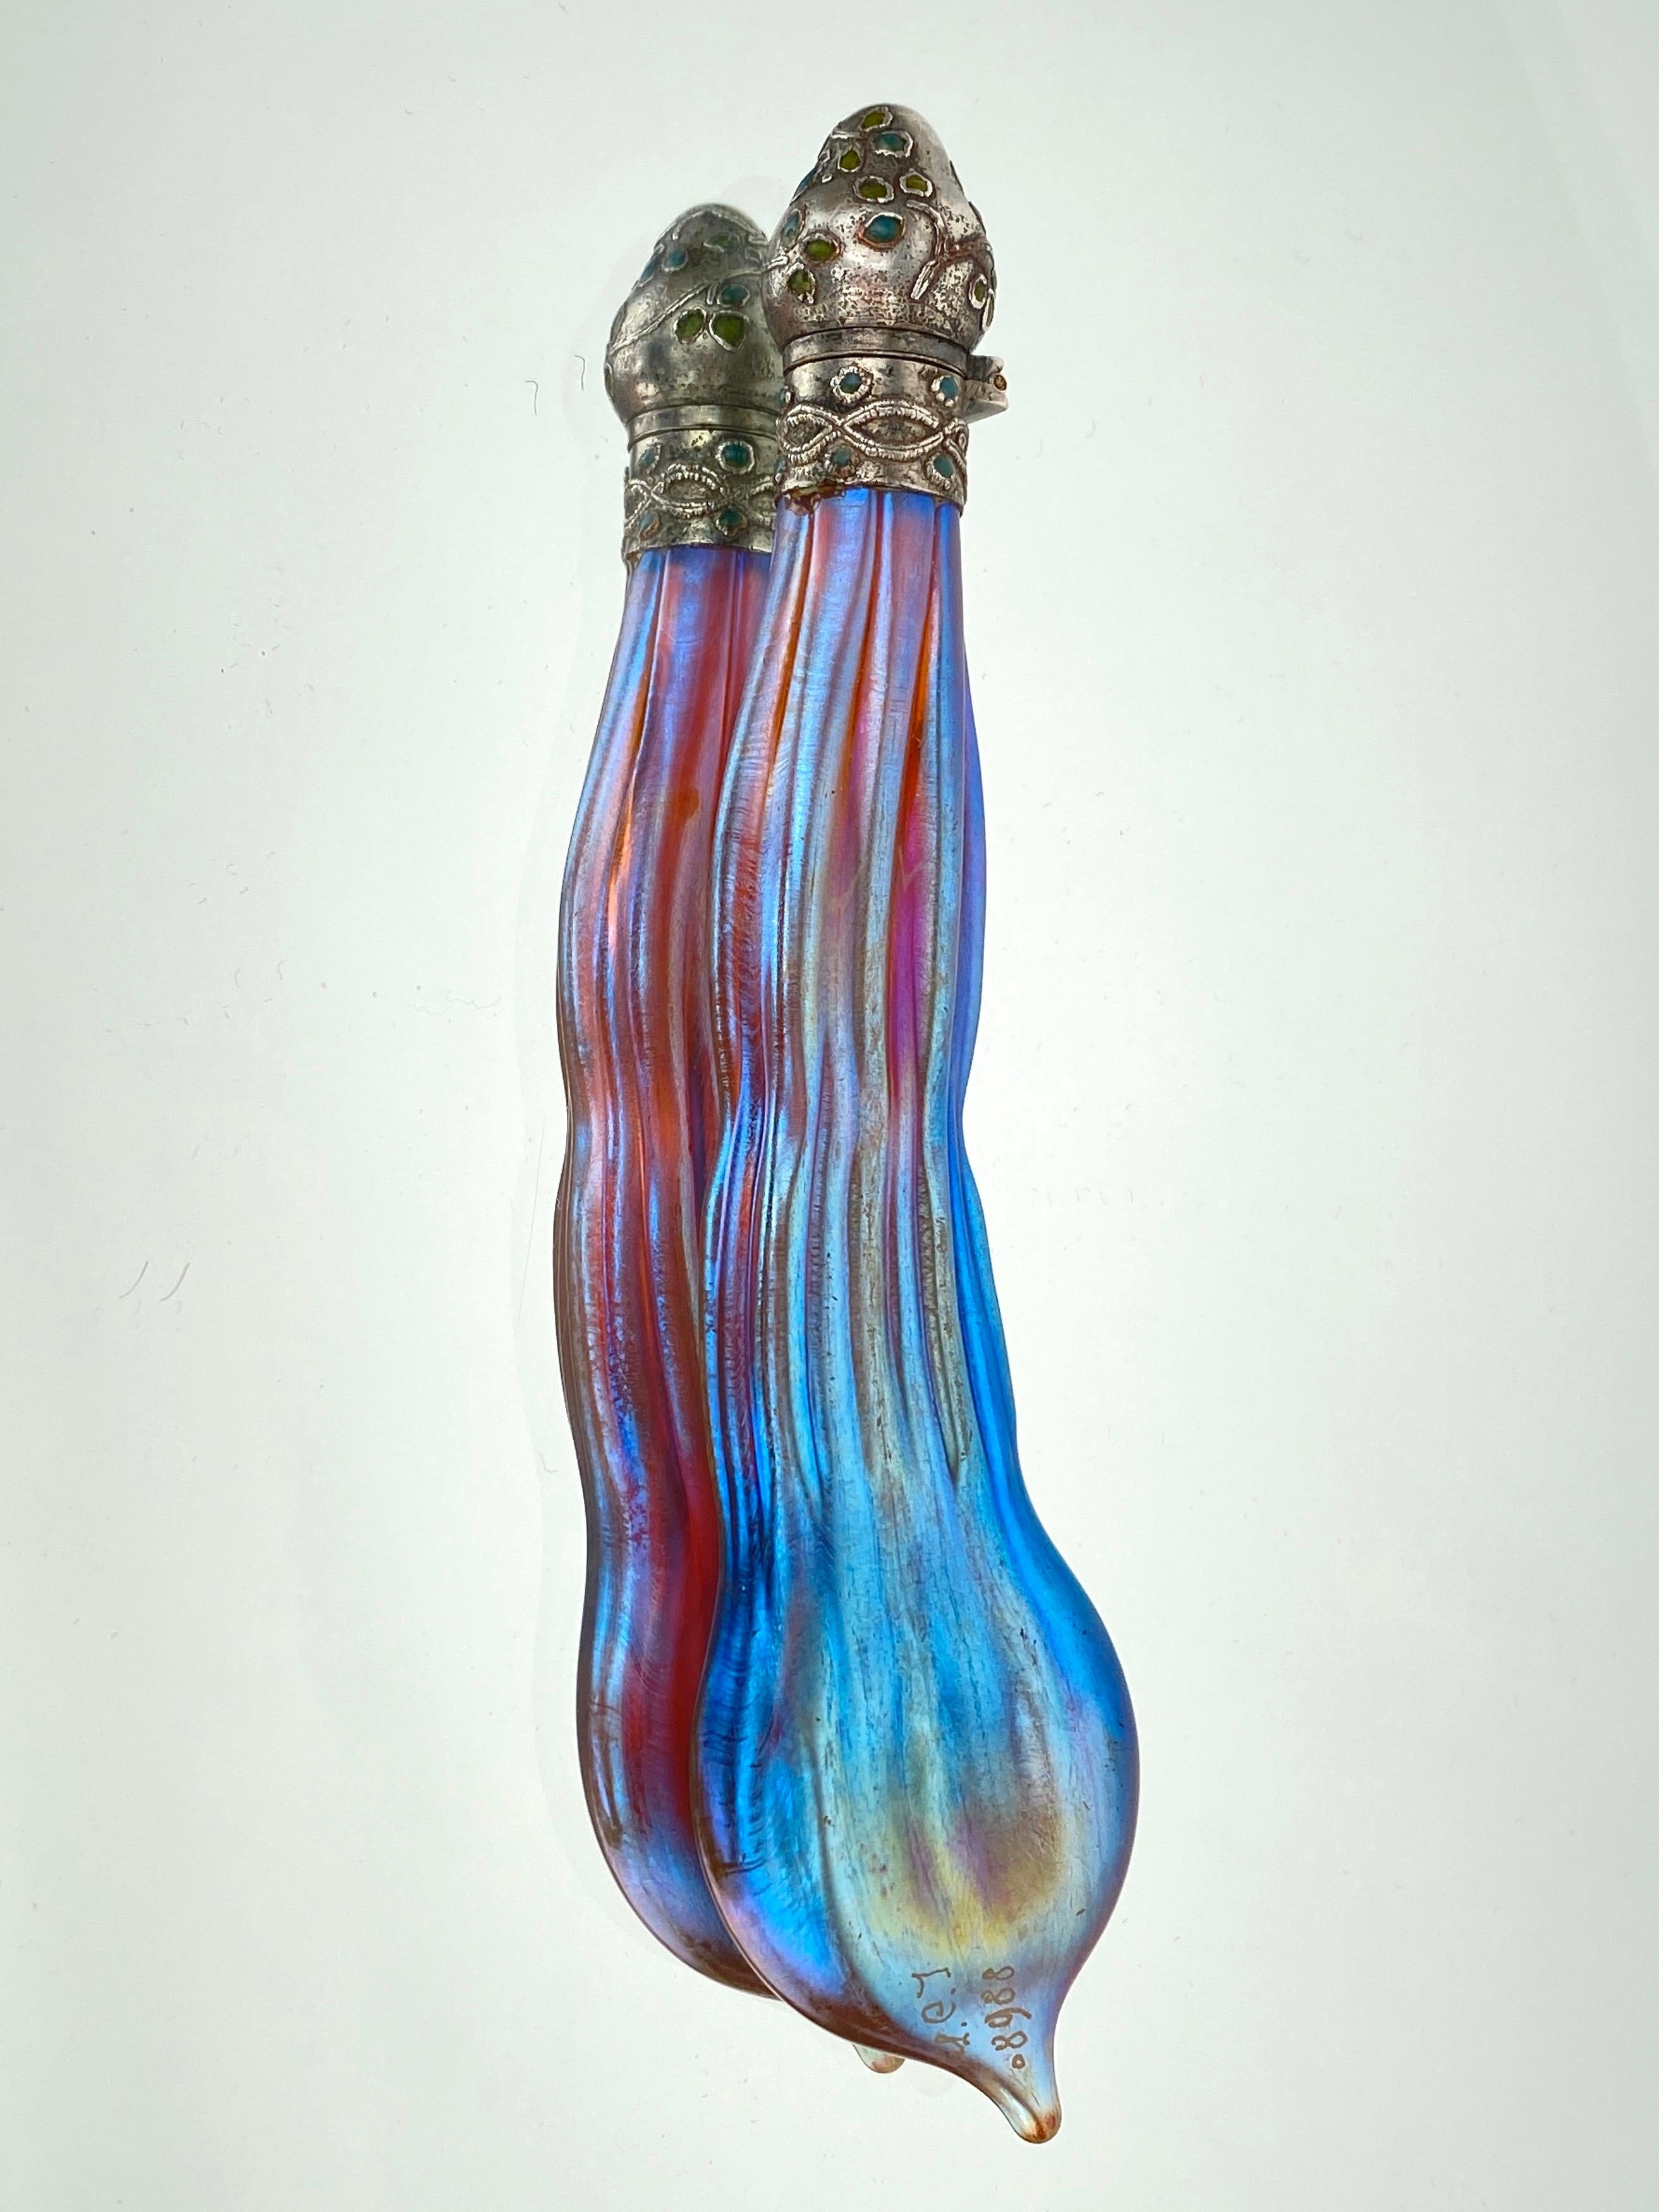 20th Century Art Nouveau Tiffany Favrile Lay Down Perfume/Scent Bottle by, Tiffany Studios